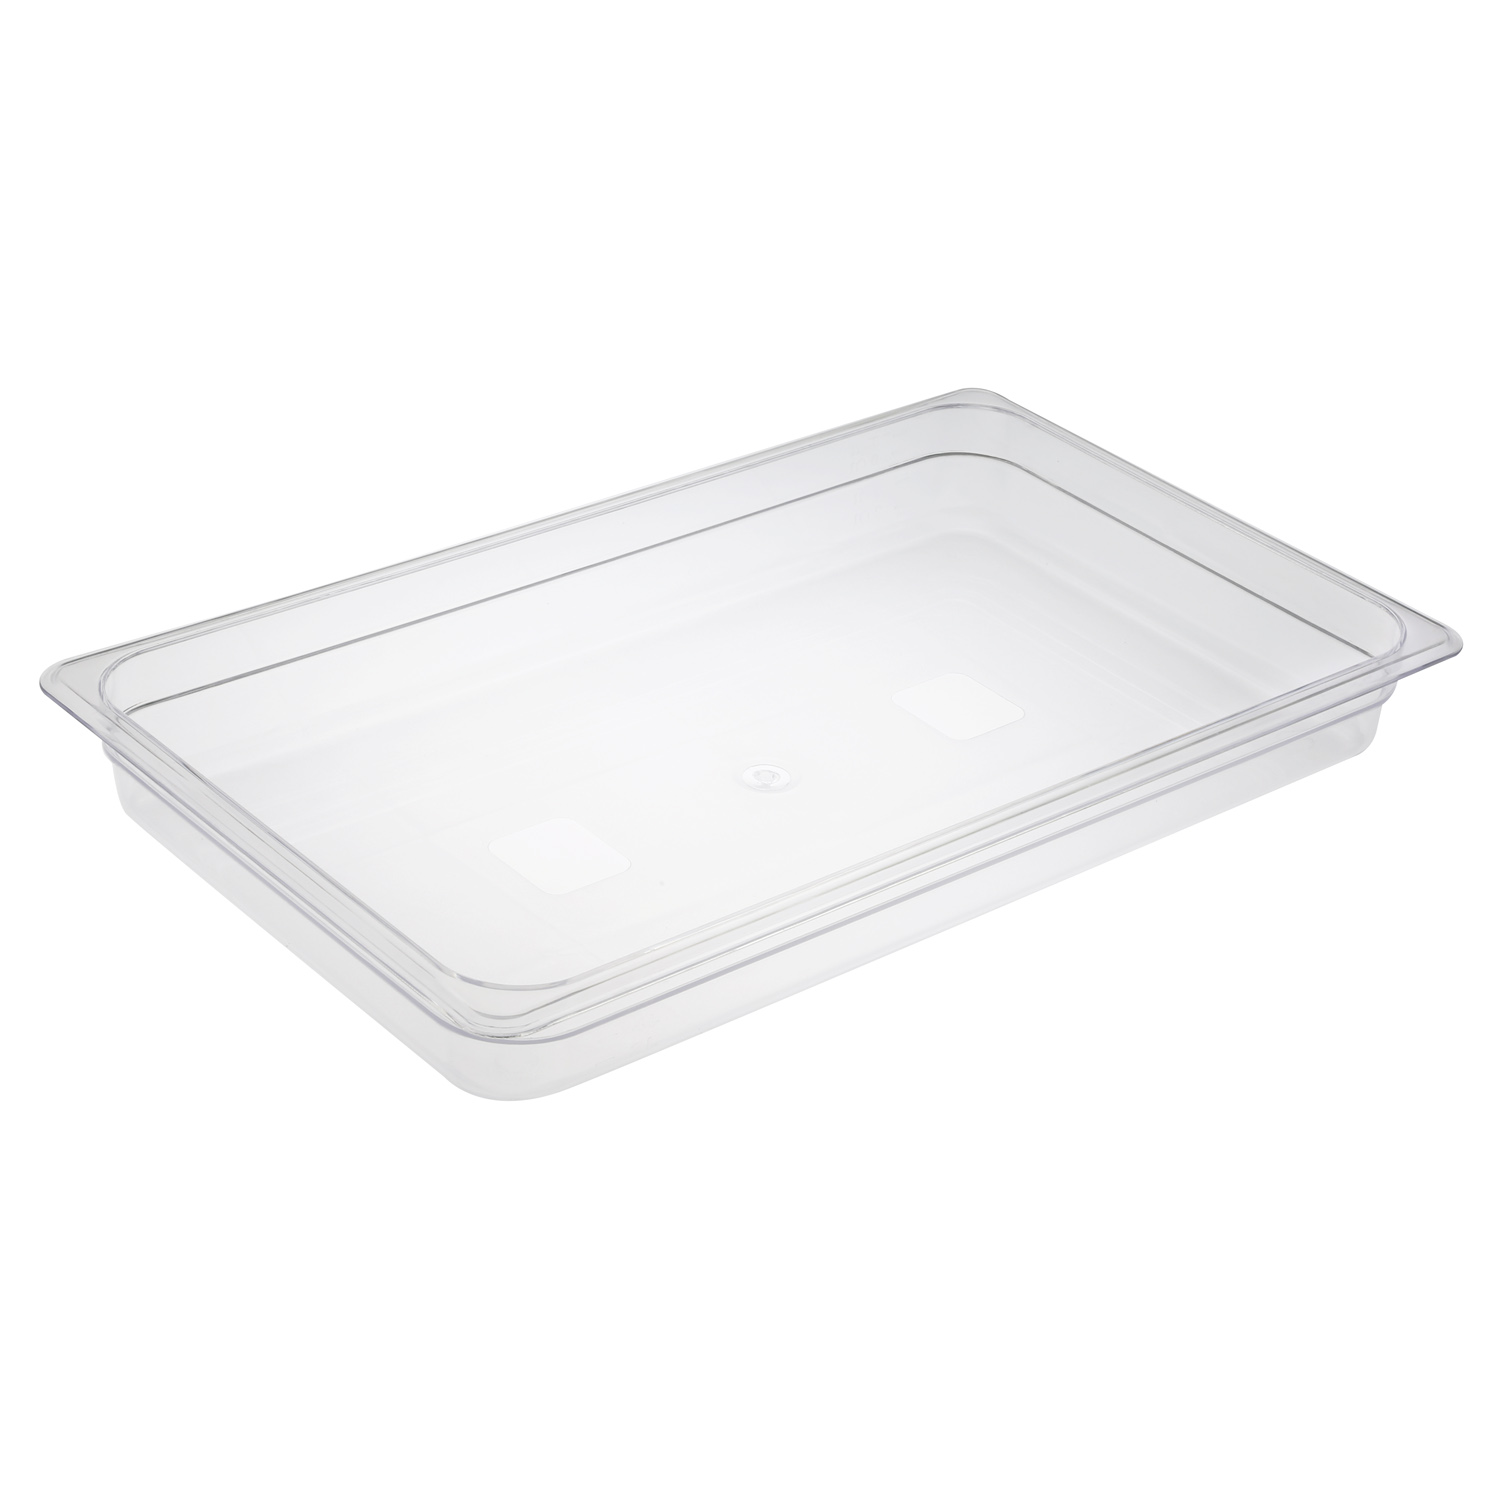 CAC China PCFP-F2 Full Size Polycarbonate Food Pan 2-1/2" Deep